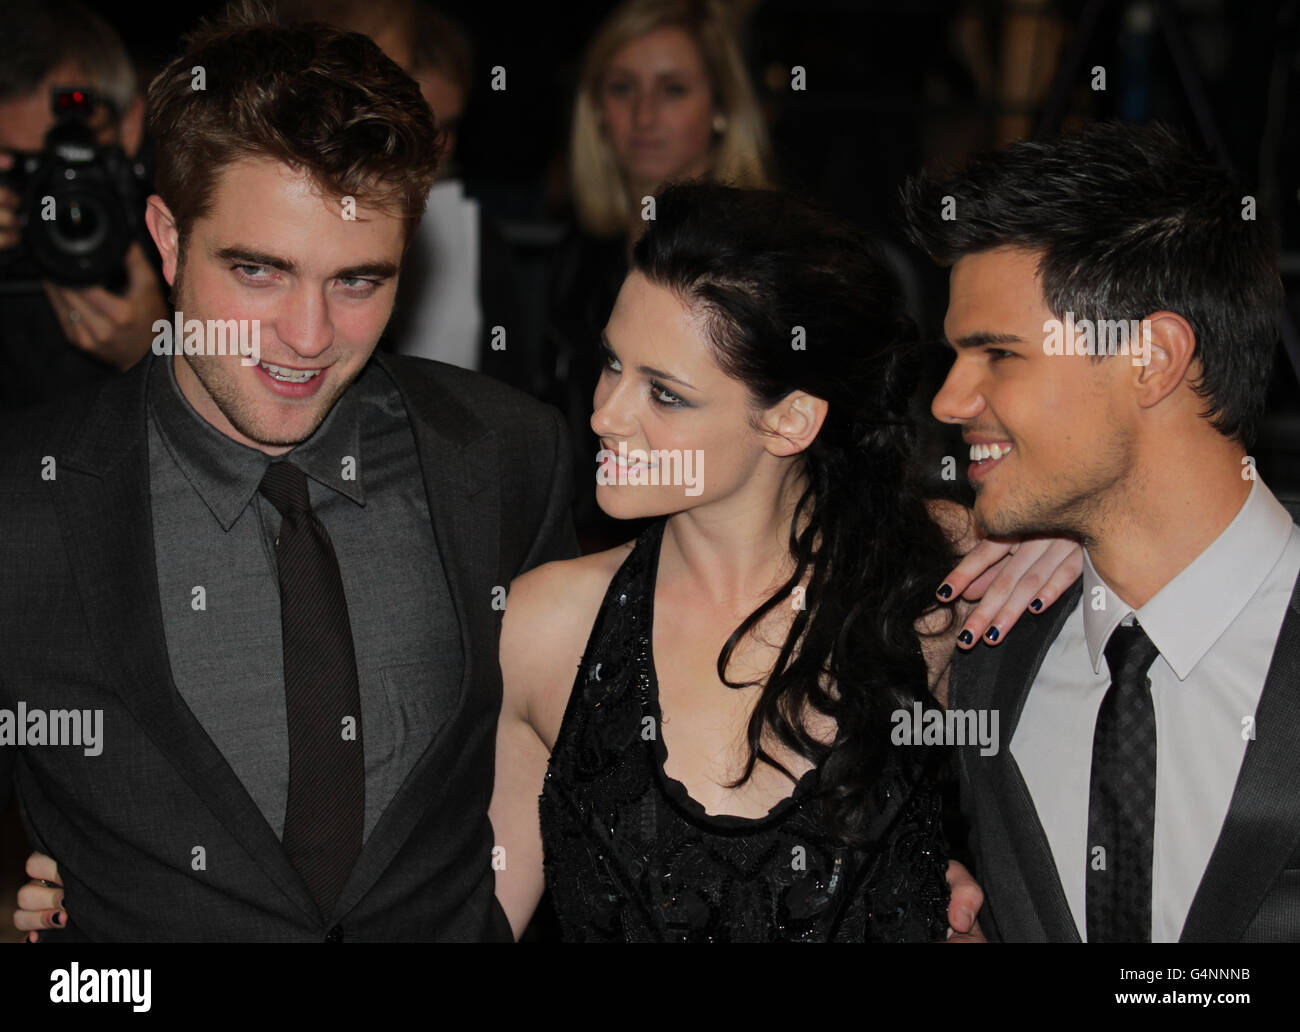 Robert Pattinson, Kristen Stewart and Taylor Lautner arriving for the UK premiere of The Twilight Saga: Breaking Dawn Part 1, at the Westfield Stratford City, Stratford, London. Stock Photo